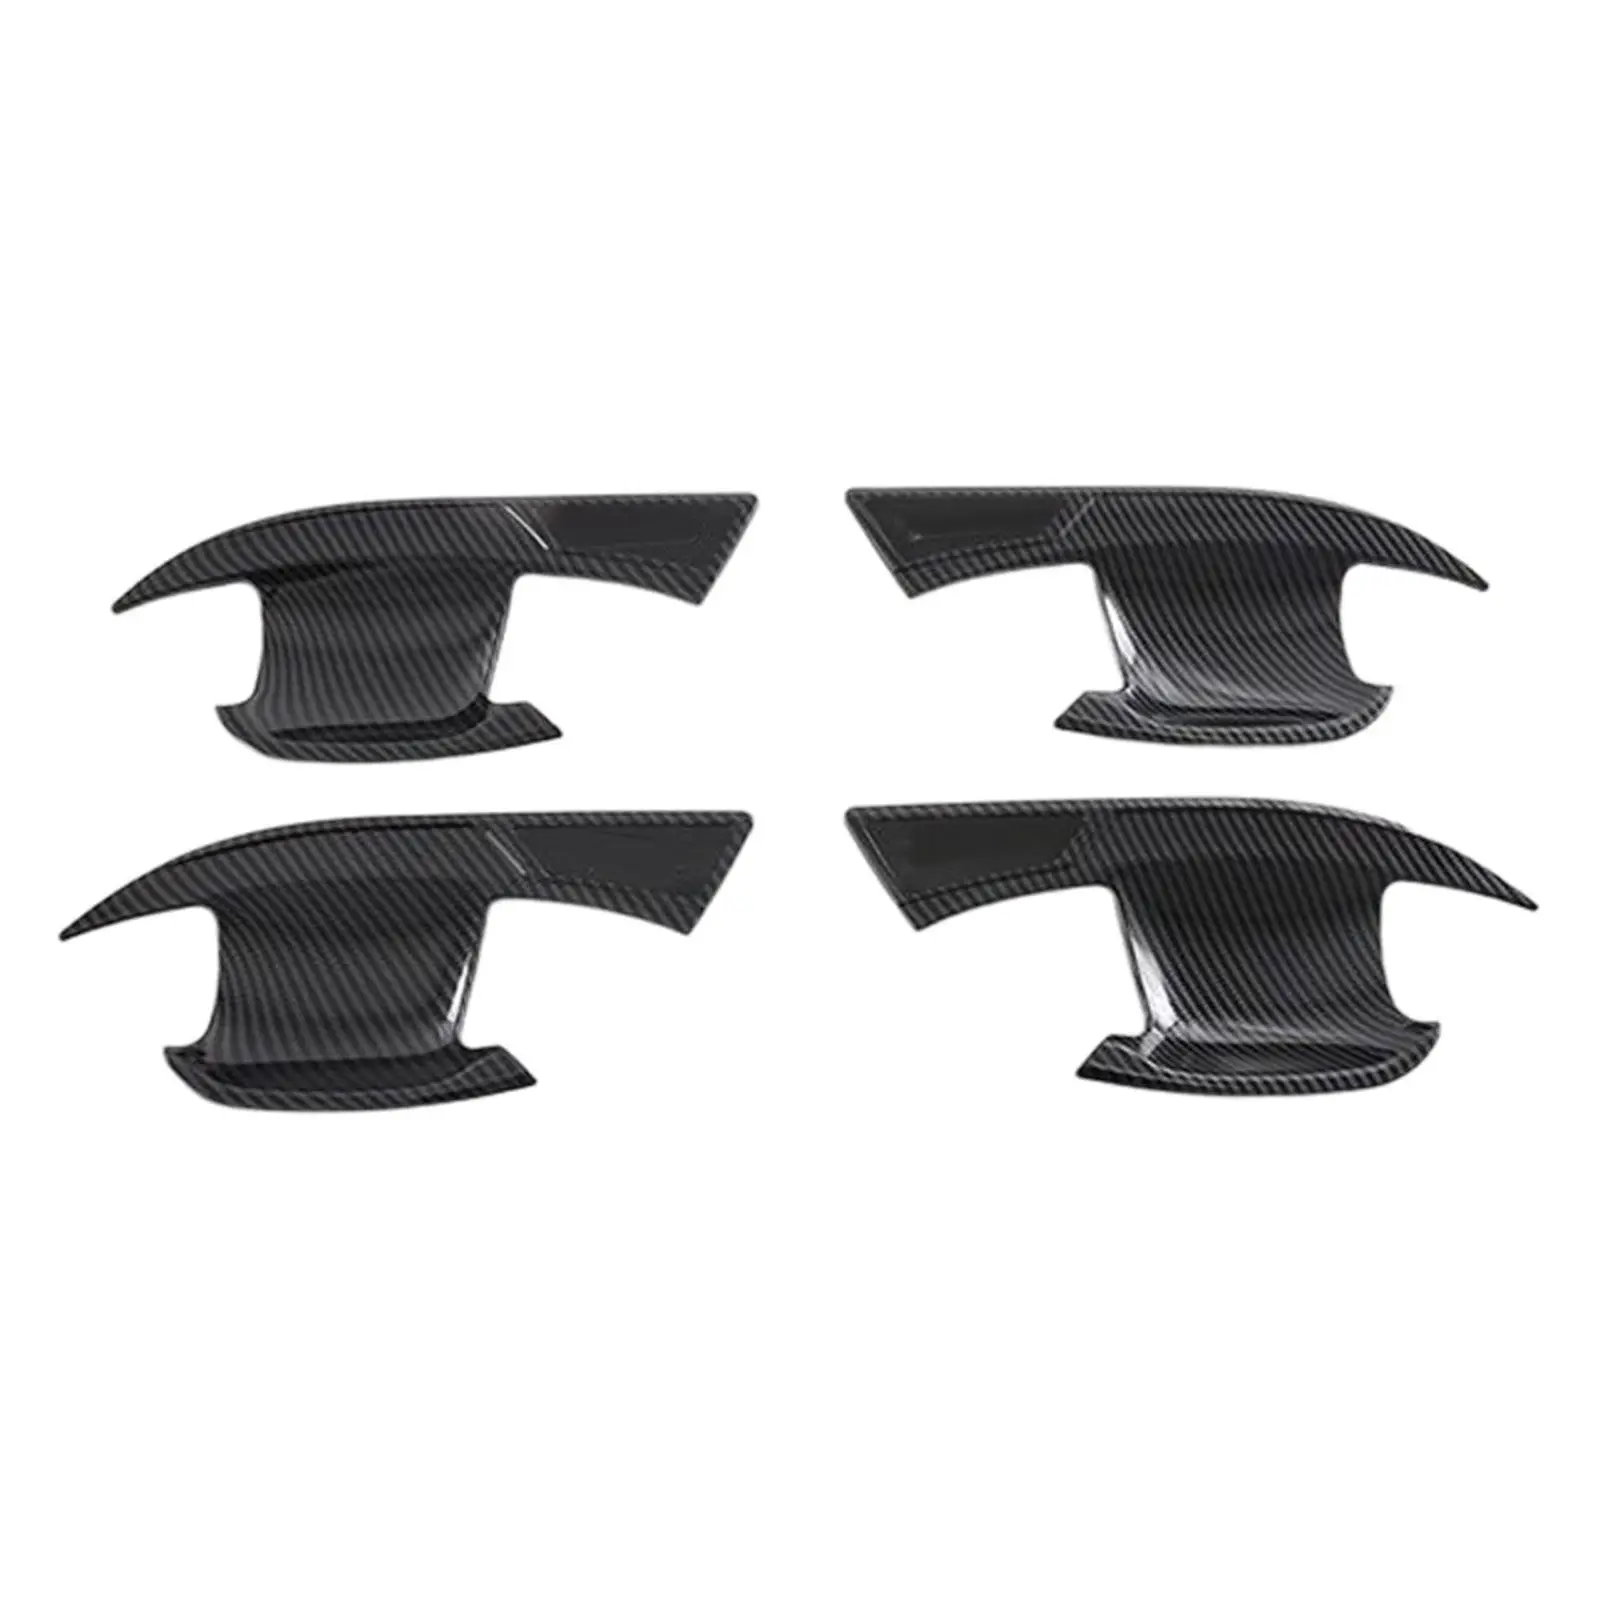 4x Car Door Bowl Handle Trim Stickers Auto Scratch Protection Cover Protective Film Carbon Fiber for Byd Yuan Plus 22